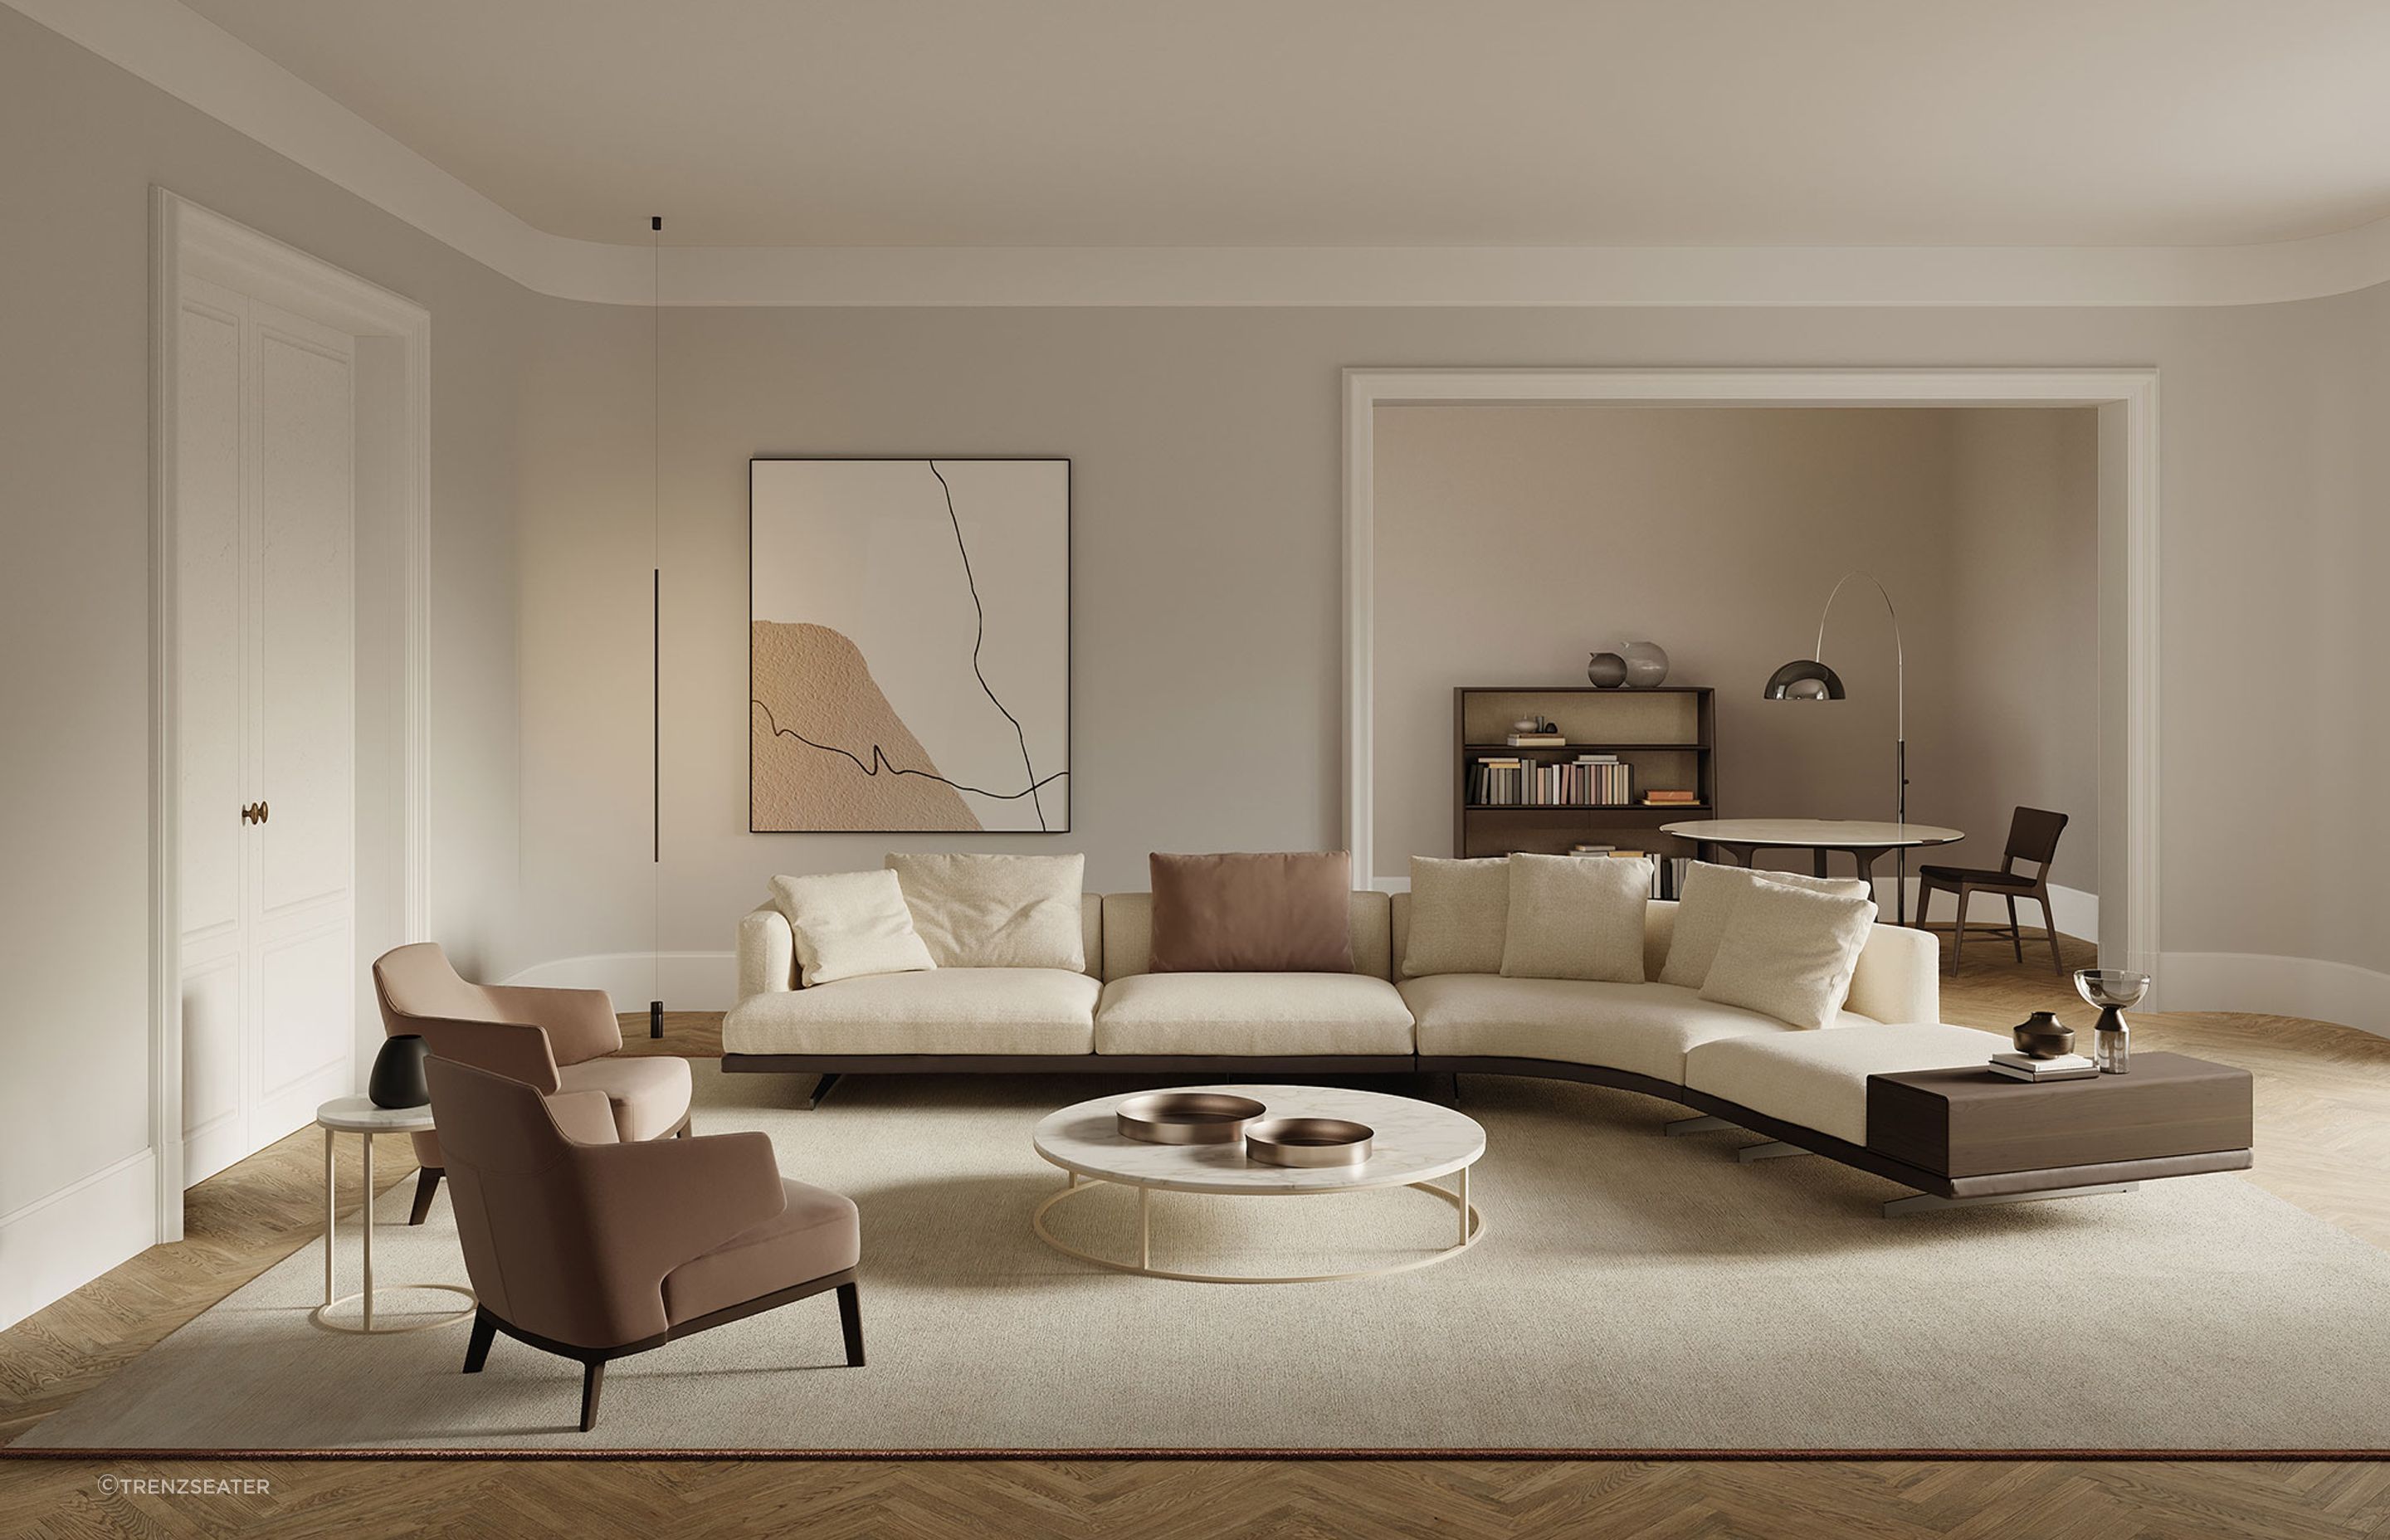 A living room layout designed to facilitate social interaction, helped by beautiful furnishings like the Horizon Sofa.